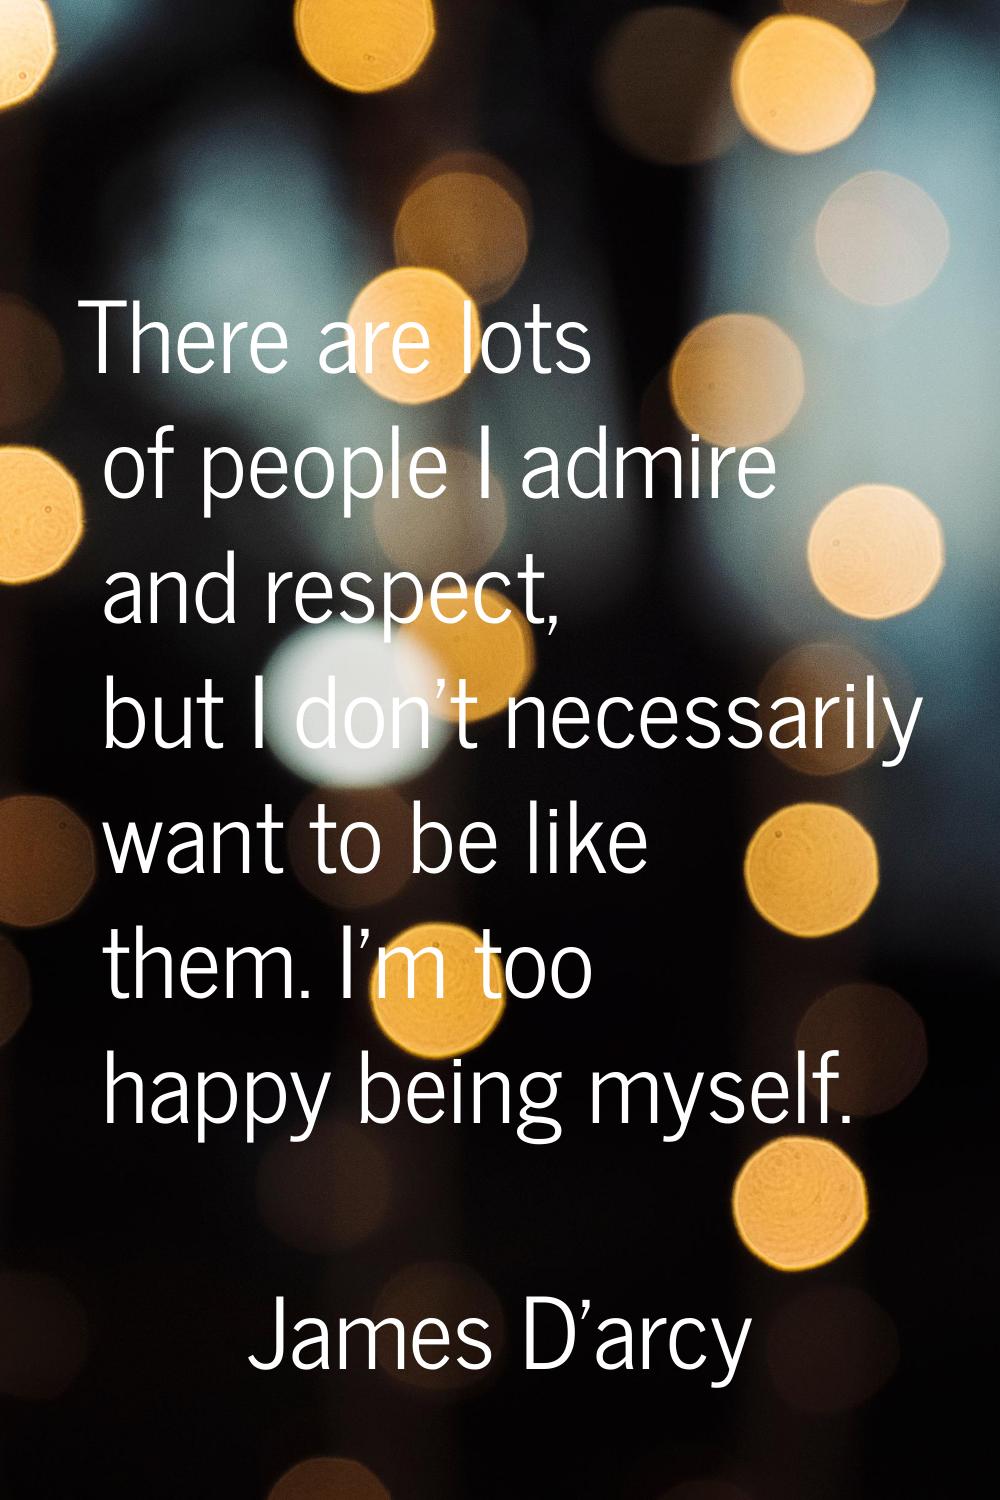 There are lots of people I admire and respect, but I don't necessarily want to be like them. I'm to